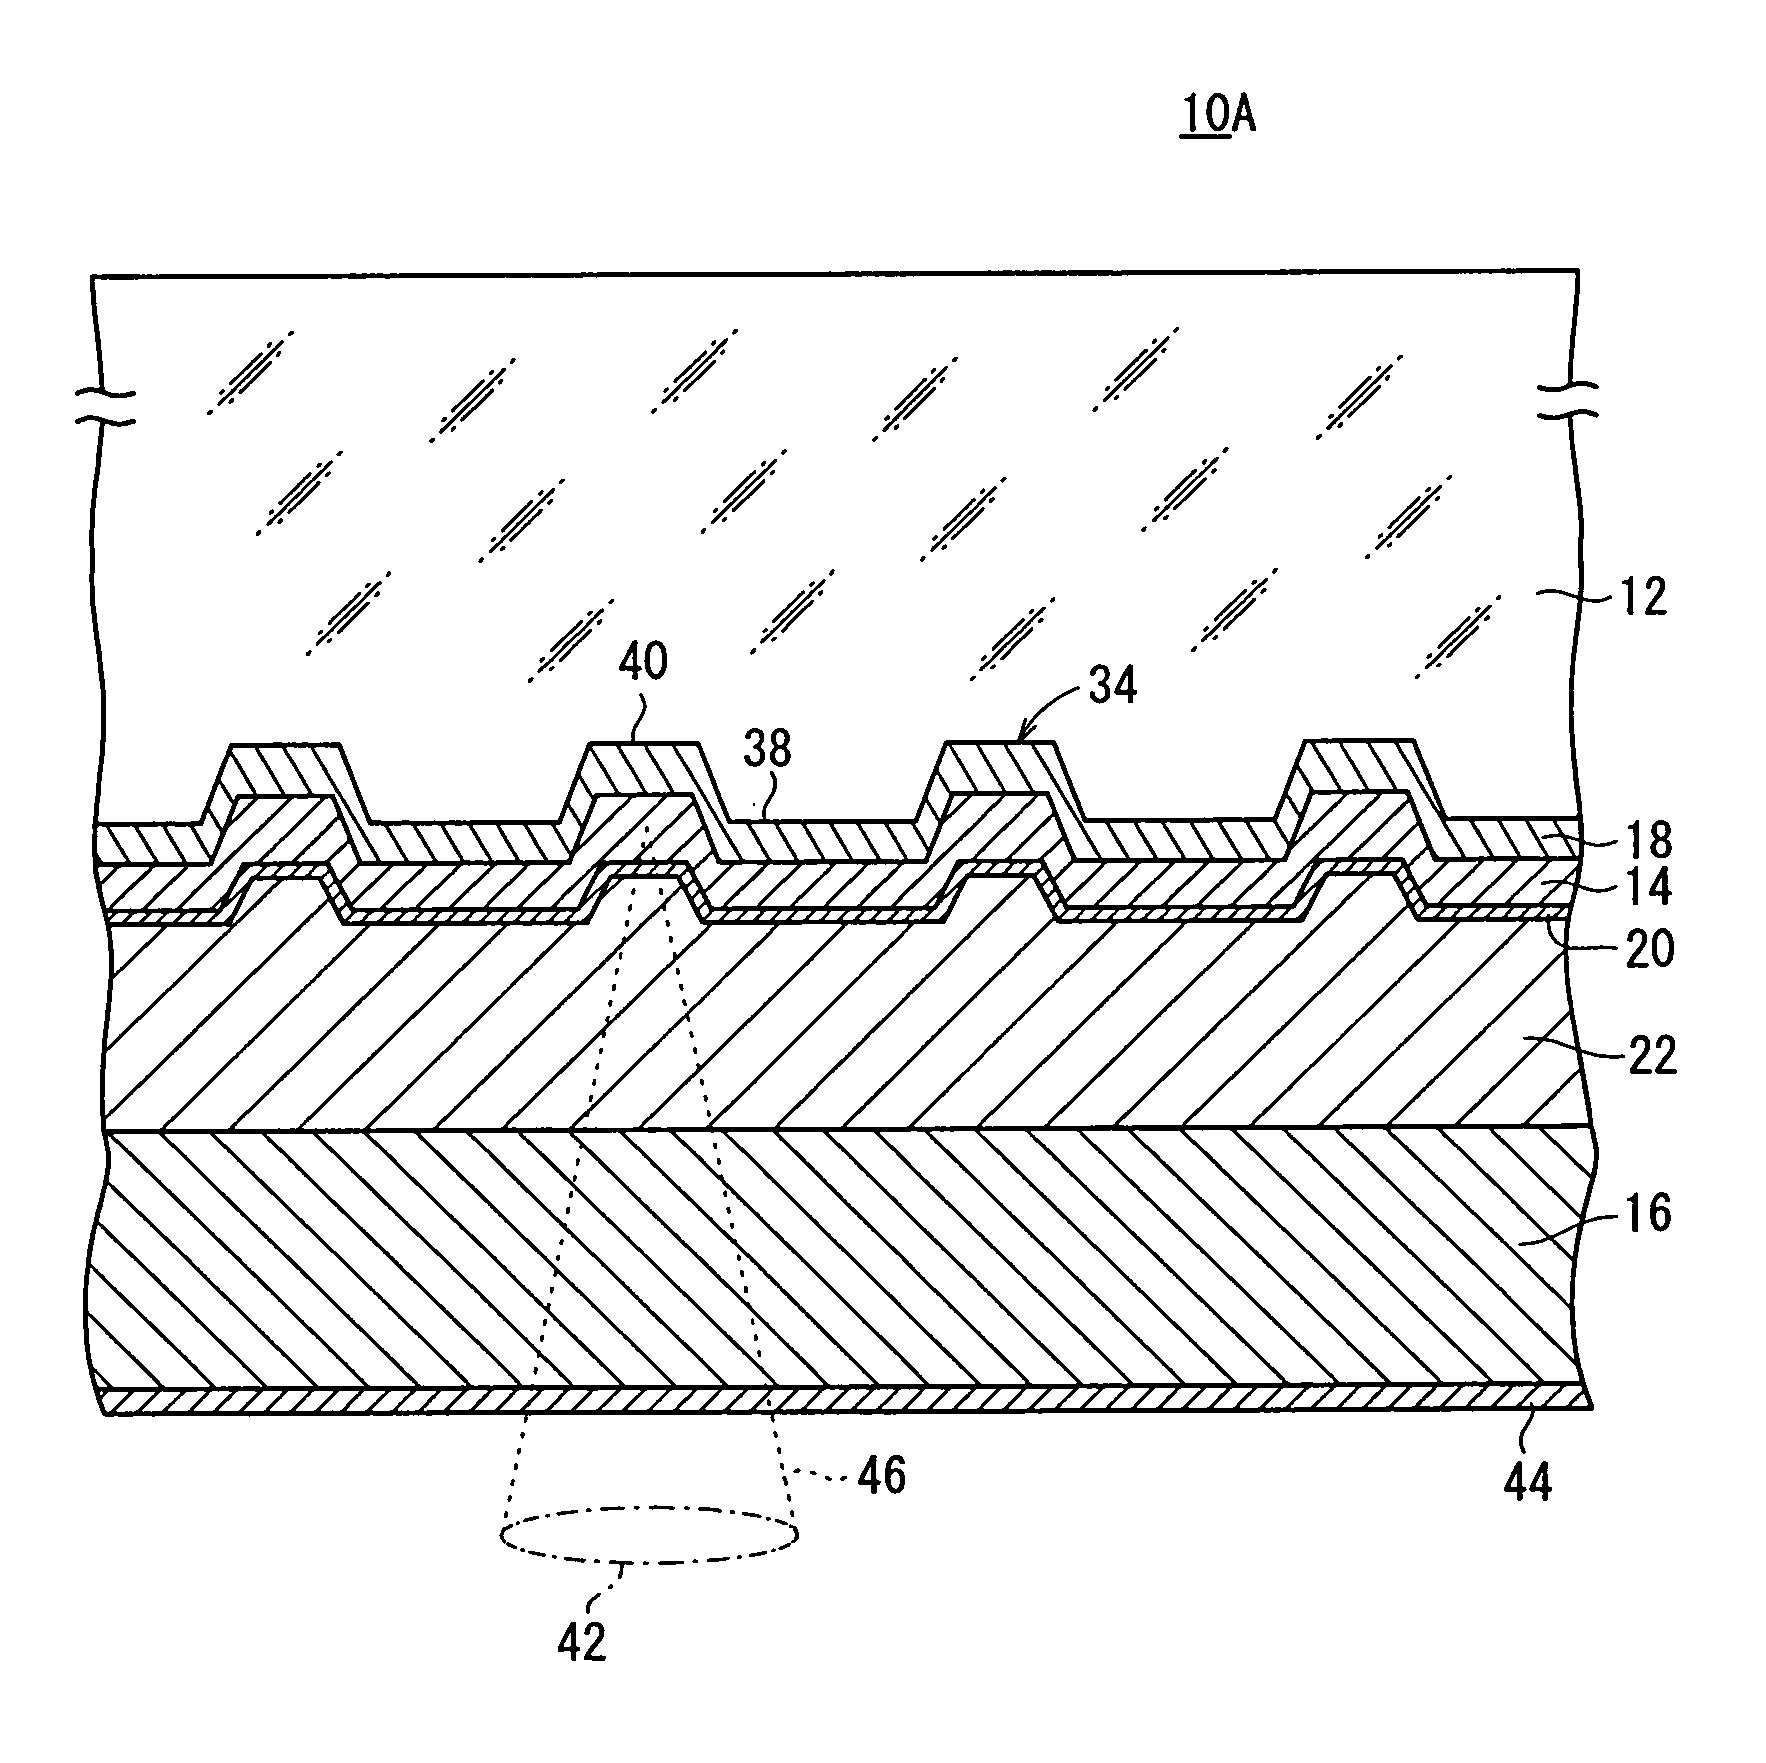 Optical information recording medum and azo-metal complex dye